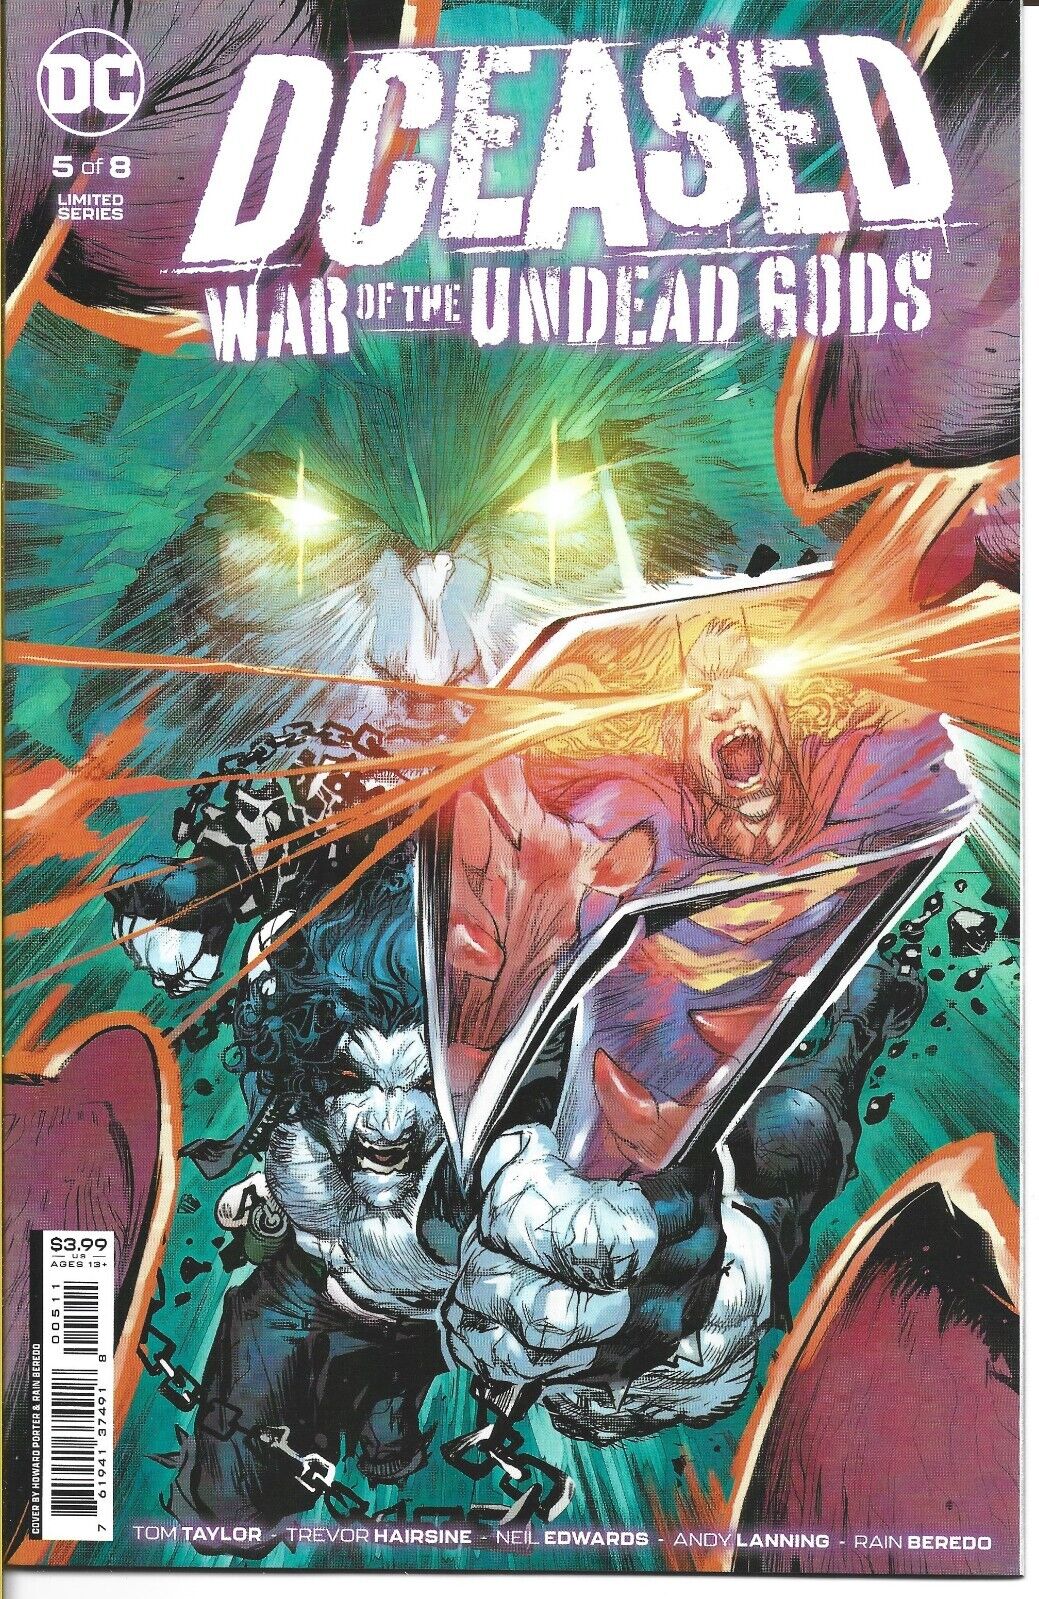 DCEASED WAR OF THE UNDEAD GODS #5 DC COMICS 2023 NEW UNREAD BAGGED AND BOARDED